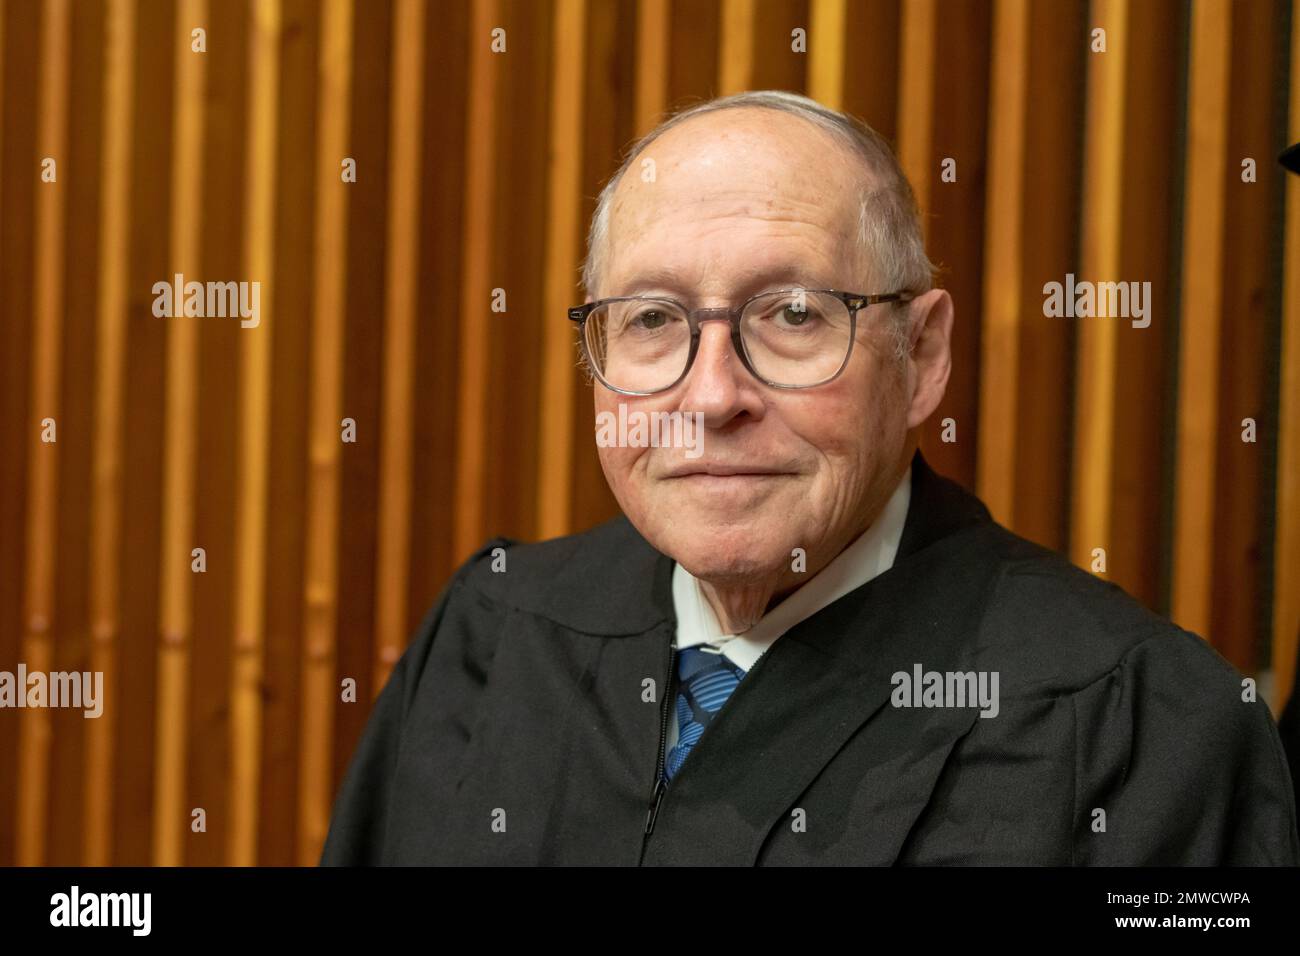 New York, New York, USA. 3rd Mar, 2023. (NEW) International Mock Trial on Human Rights. January 31, 2023, New York, New York, USA: Honorable Judge Elyakim Rubinstein, Former Vice President of the Israeli Supreme Court, attends a special event International Mock Trial on Human Rights on the occasion of the International Day of Commemoration in Memory of the Victims of the Holocaust (27 Jan) at the New York United Nations Headquarters on January 31, 2023 in New York City. The participants, student from several countries, interrogate the actions and responsibilities of Ernst R  din, the Stock Photo